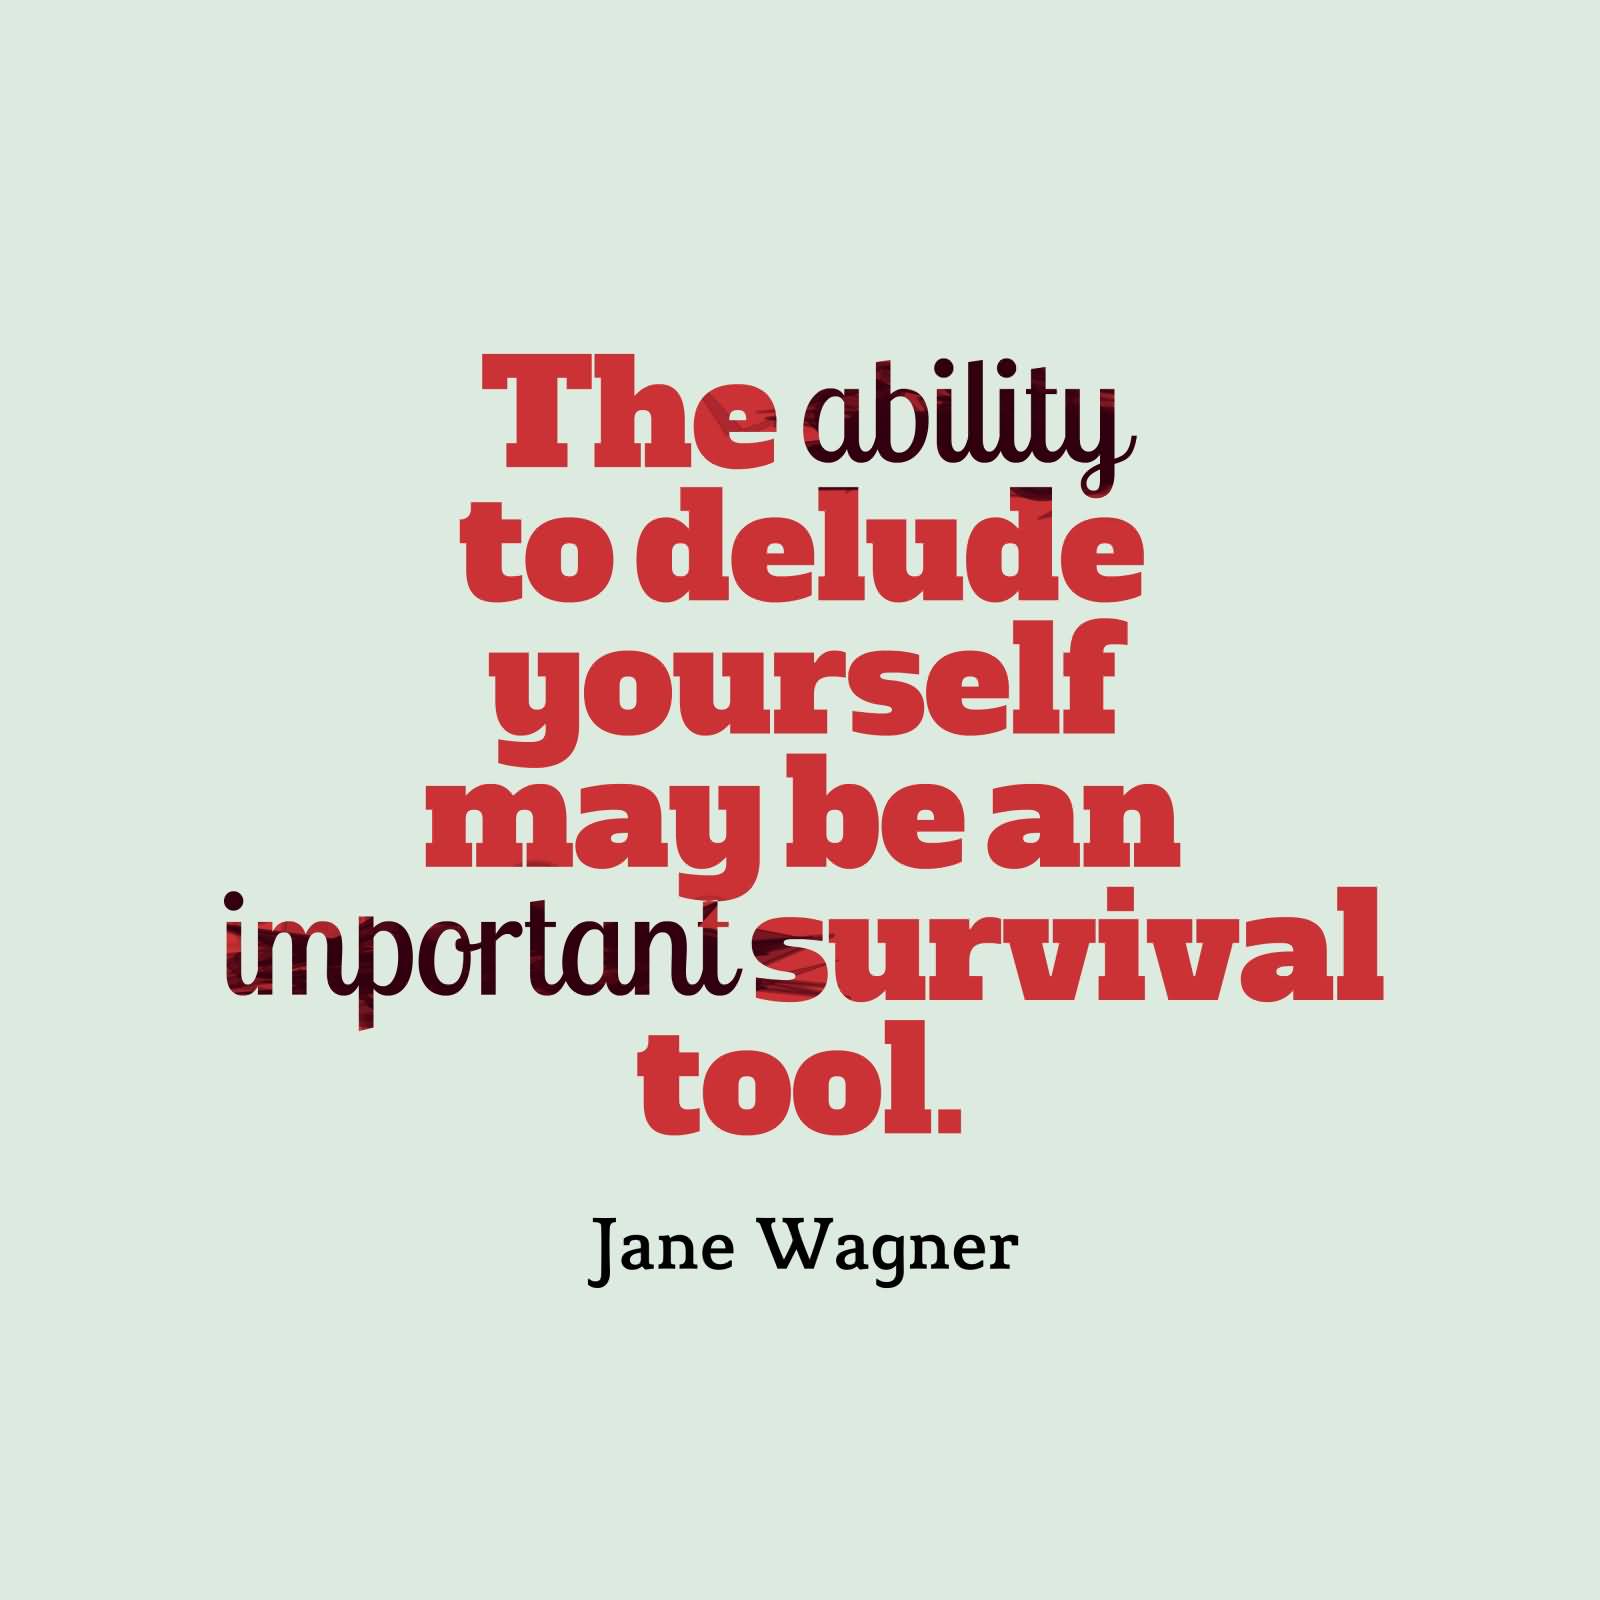 The ability to delude yourself may be an important survival tool - Jane Wagner